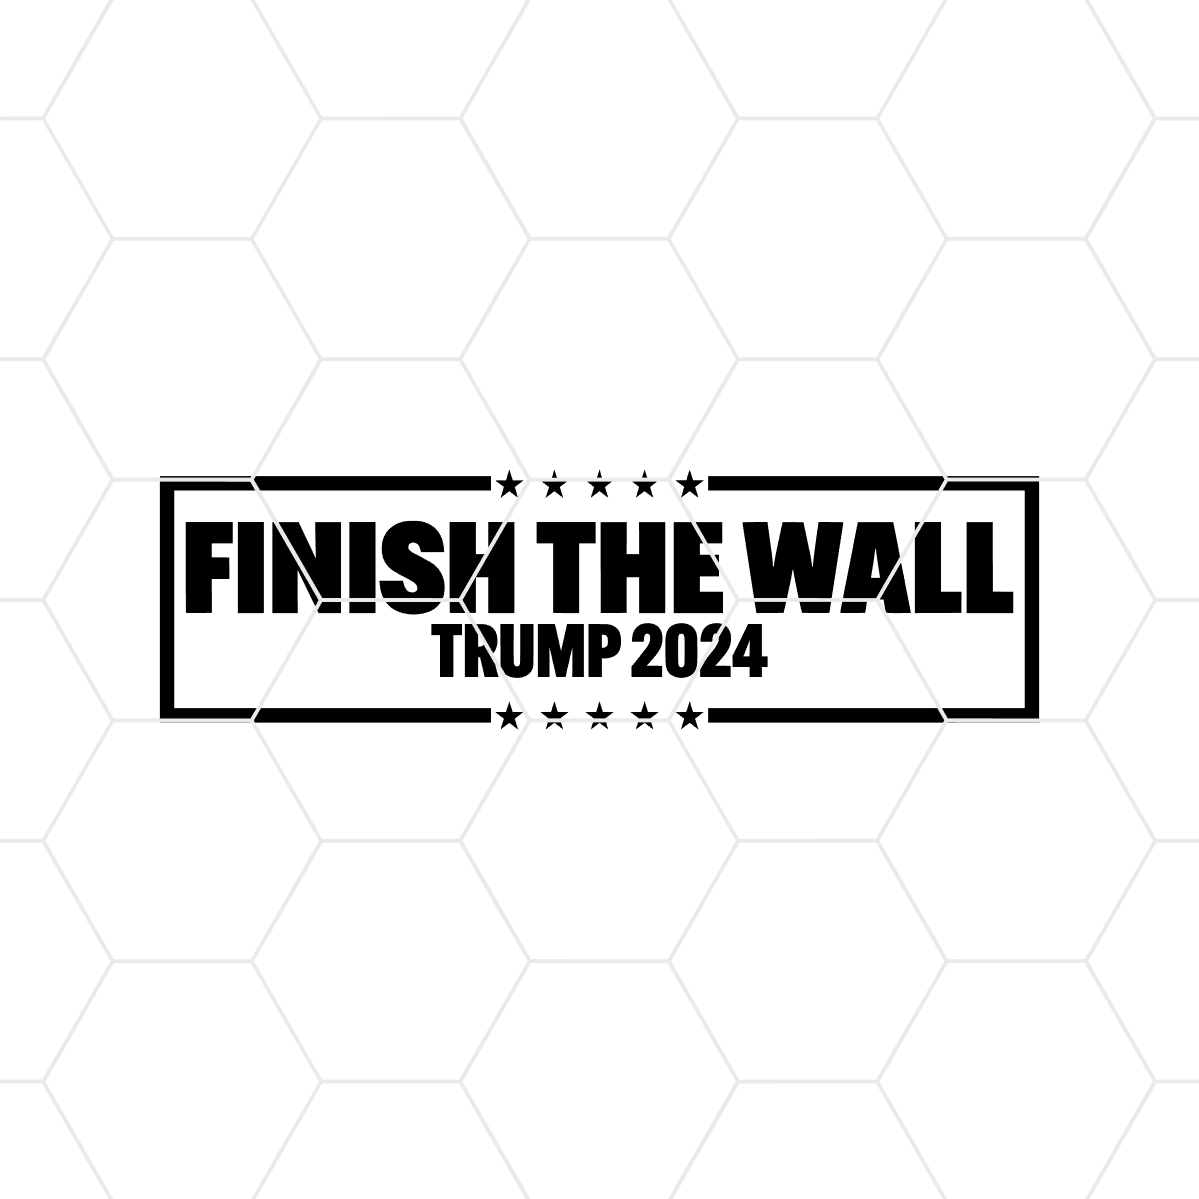 Finish The Wall Trump 2024 Decal